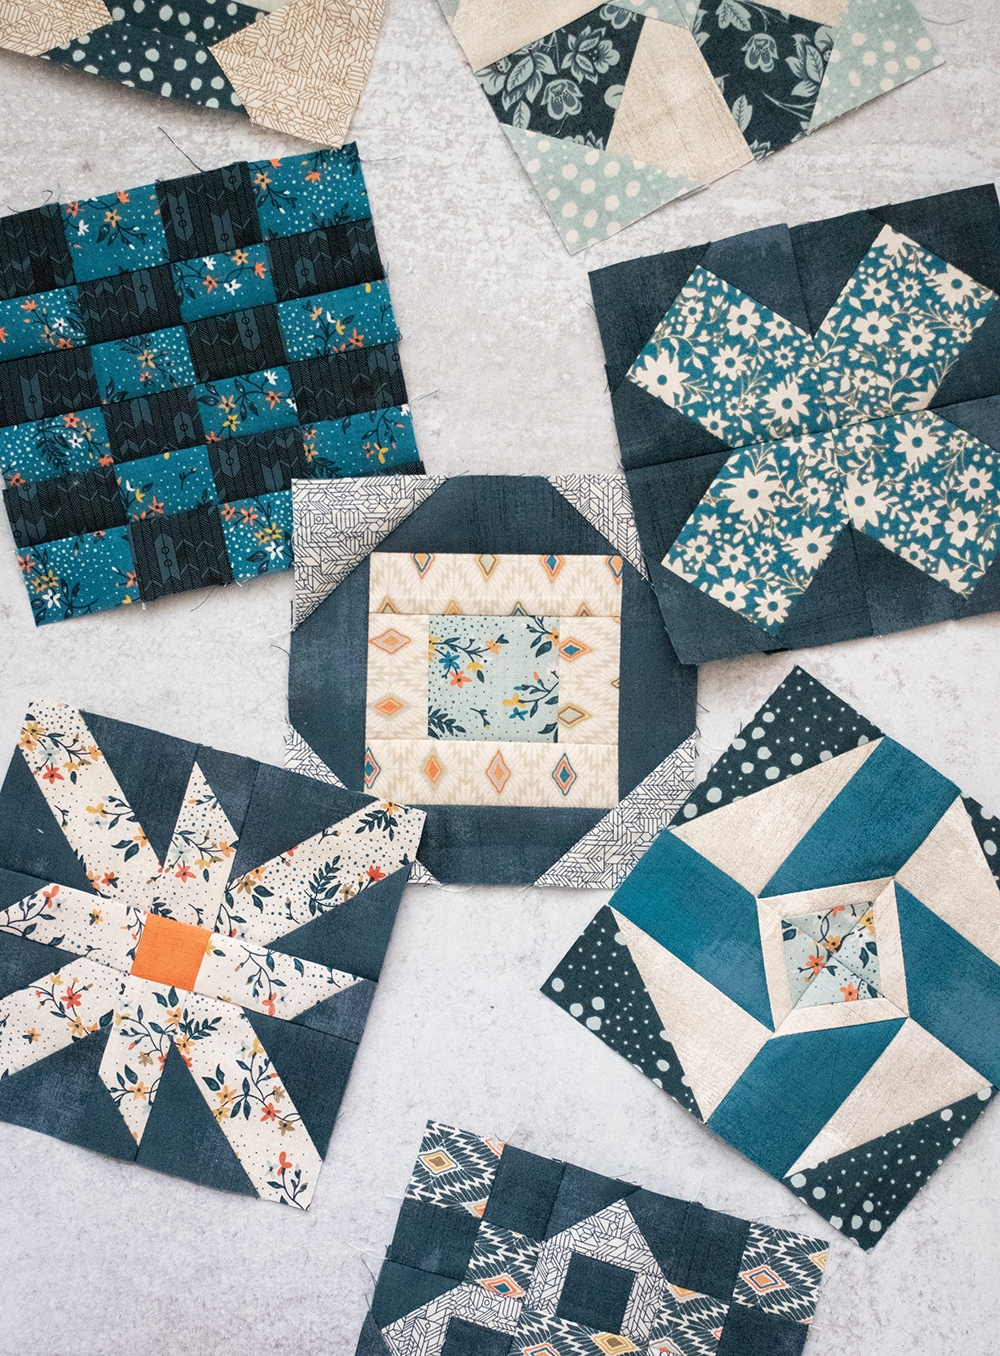 Sampler Spree Sew Along (Week 2). Check out Vanessa's blocks using Cider and Persimmon fabric by BasicGrey + her fall leaf quilt top layout.